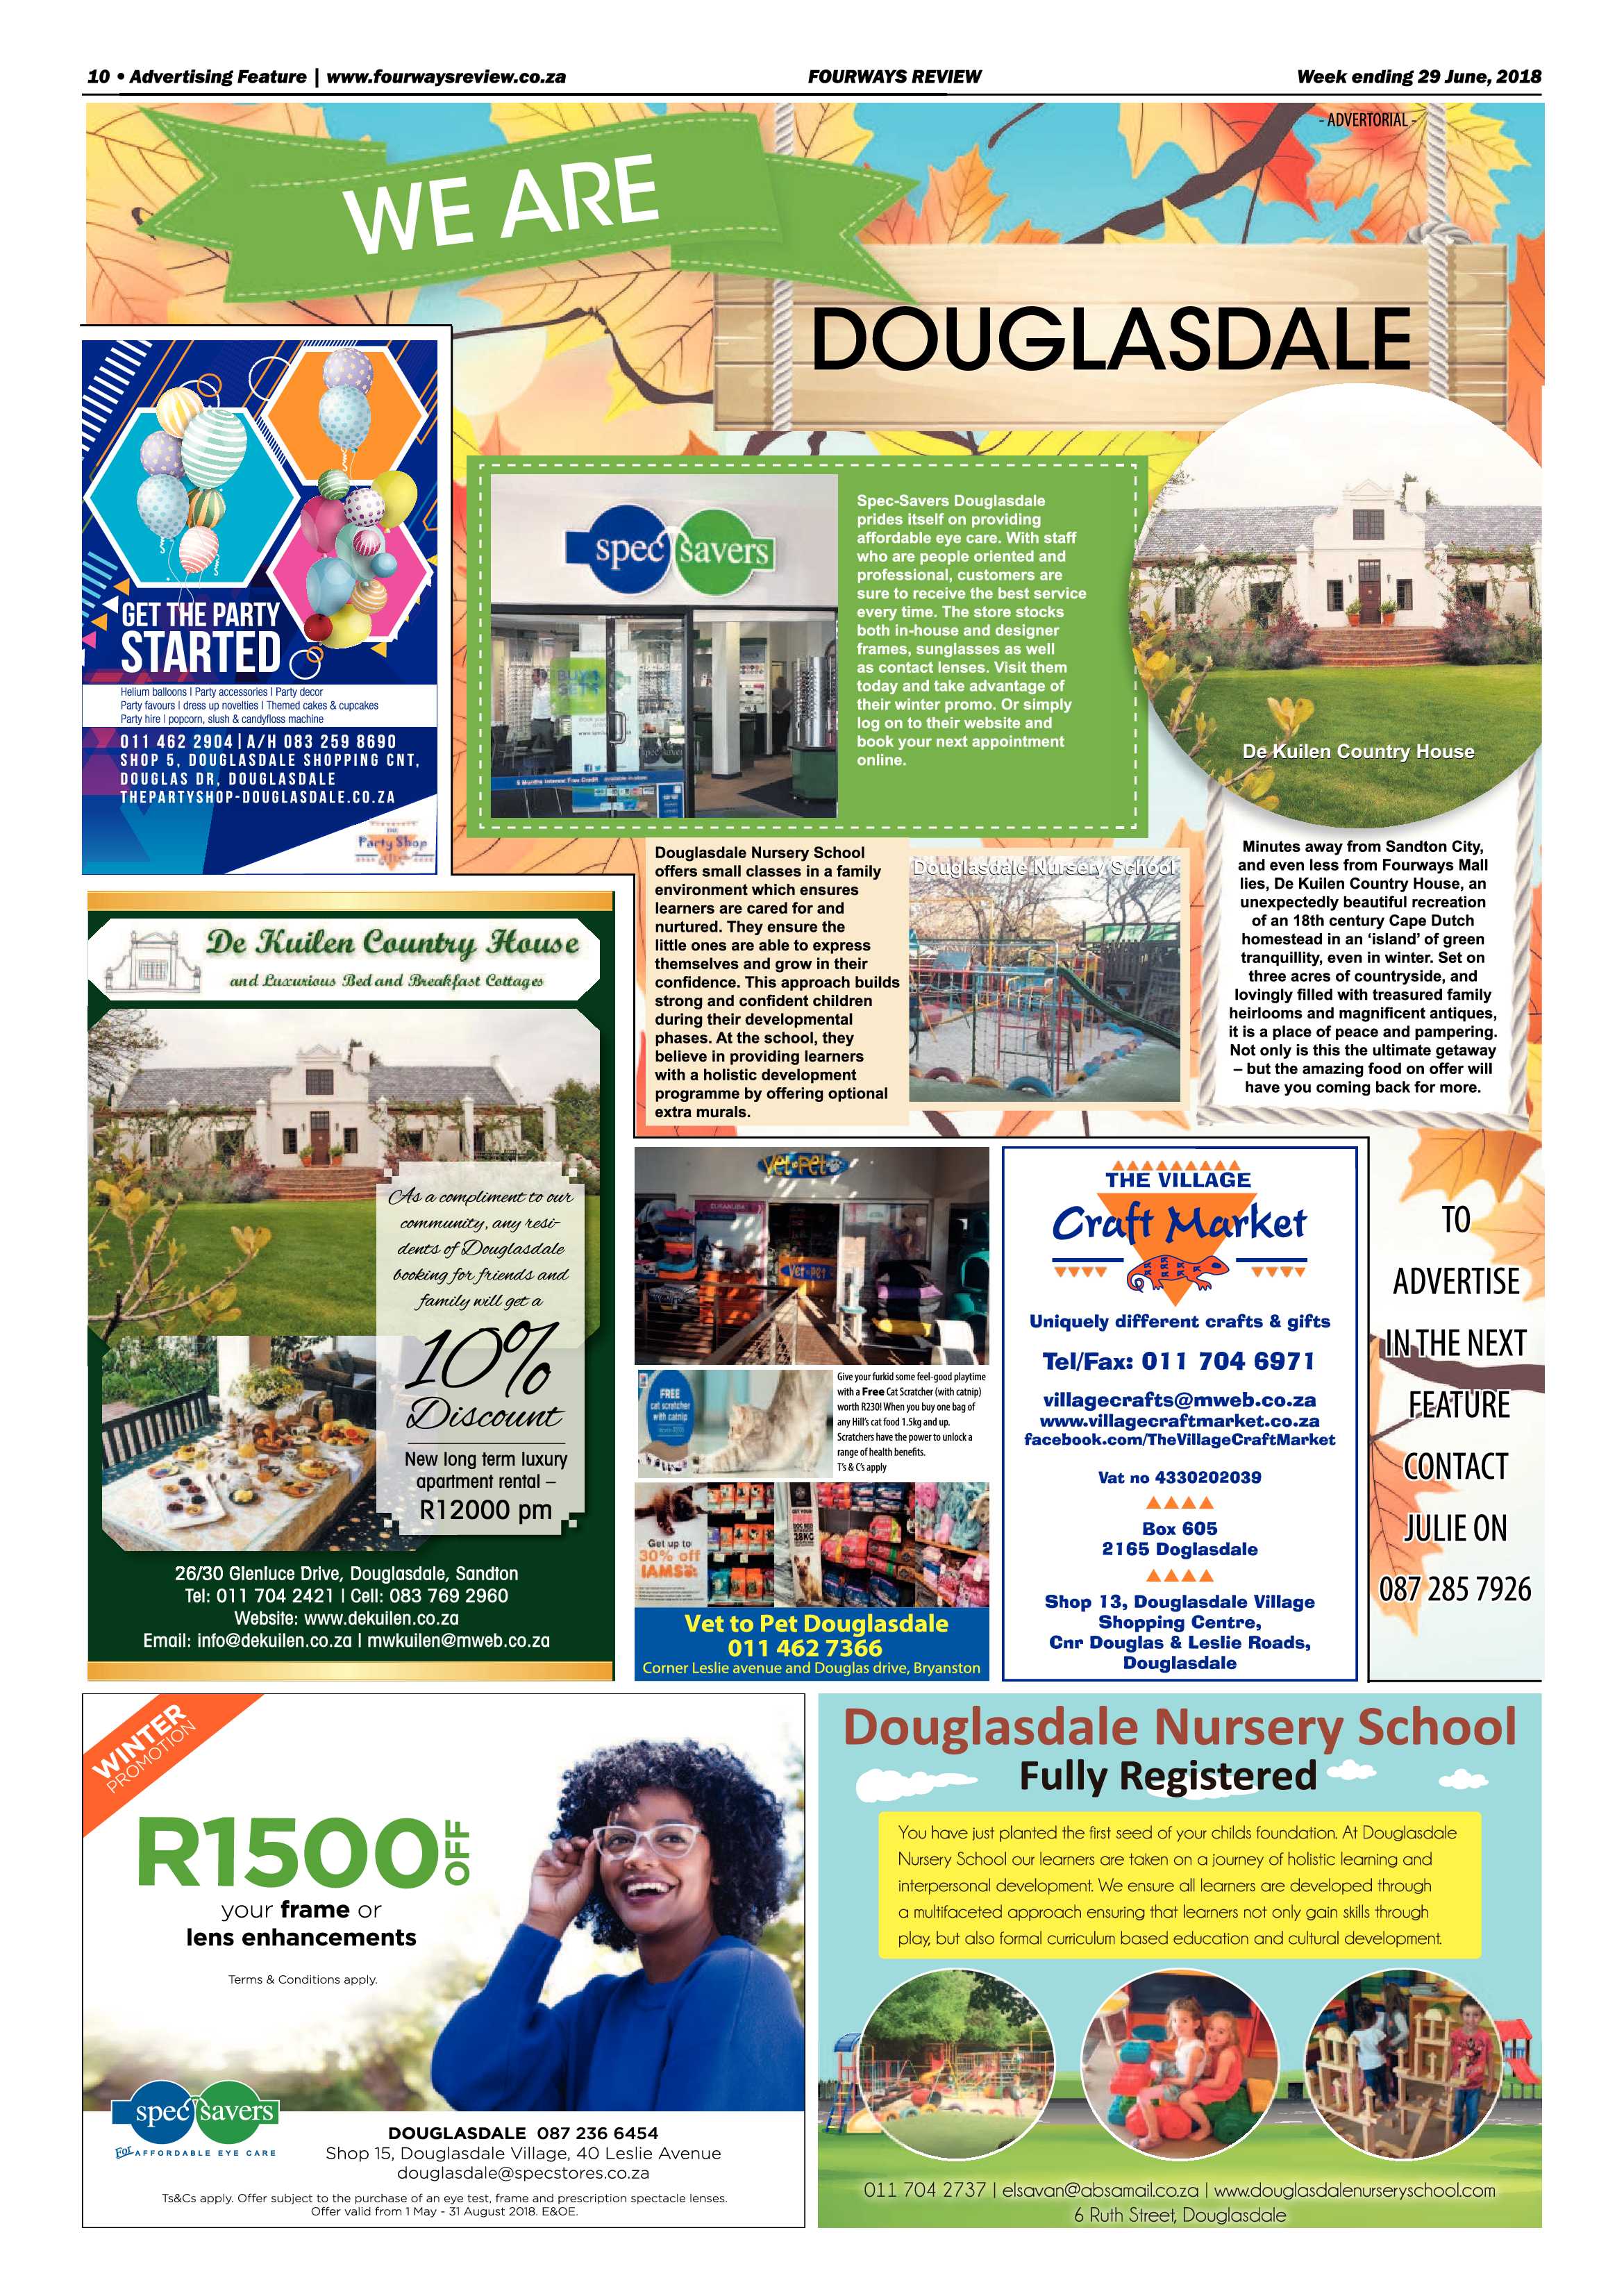 Fourways Review 29 June, 2018 page 10